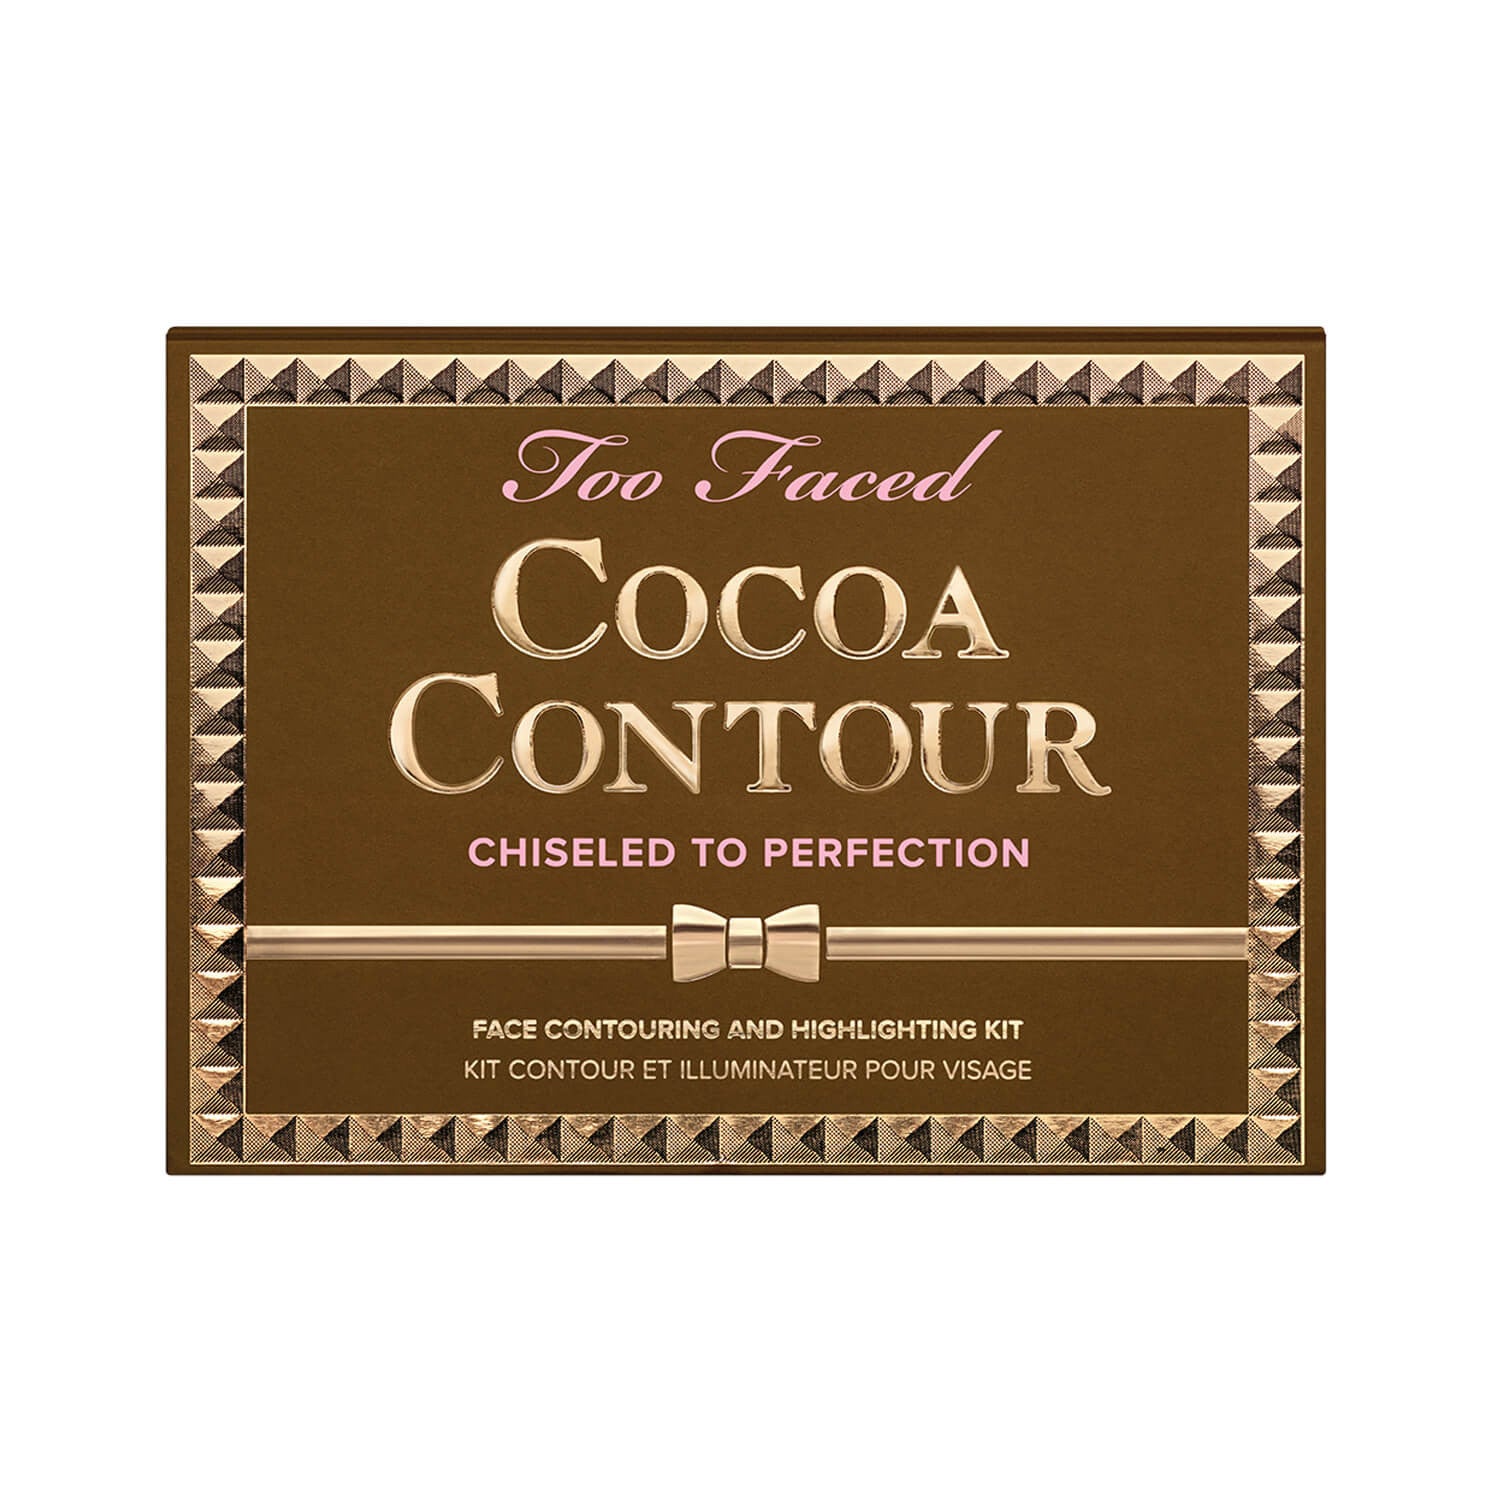 Too Faced Cocoa Contour Chiseled to Perfection Close